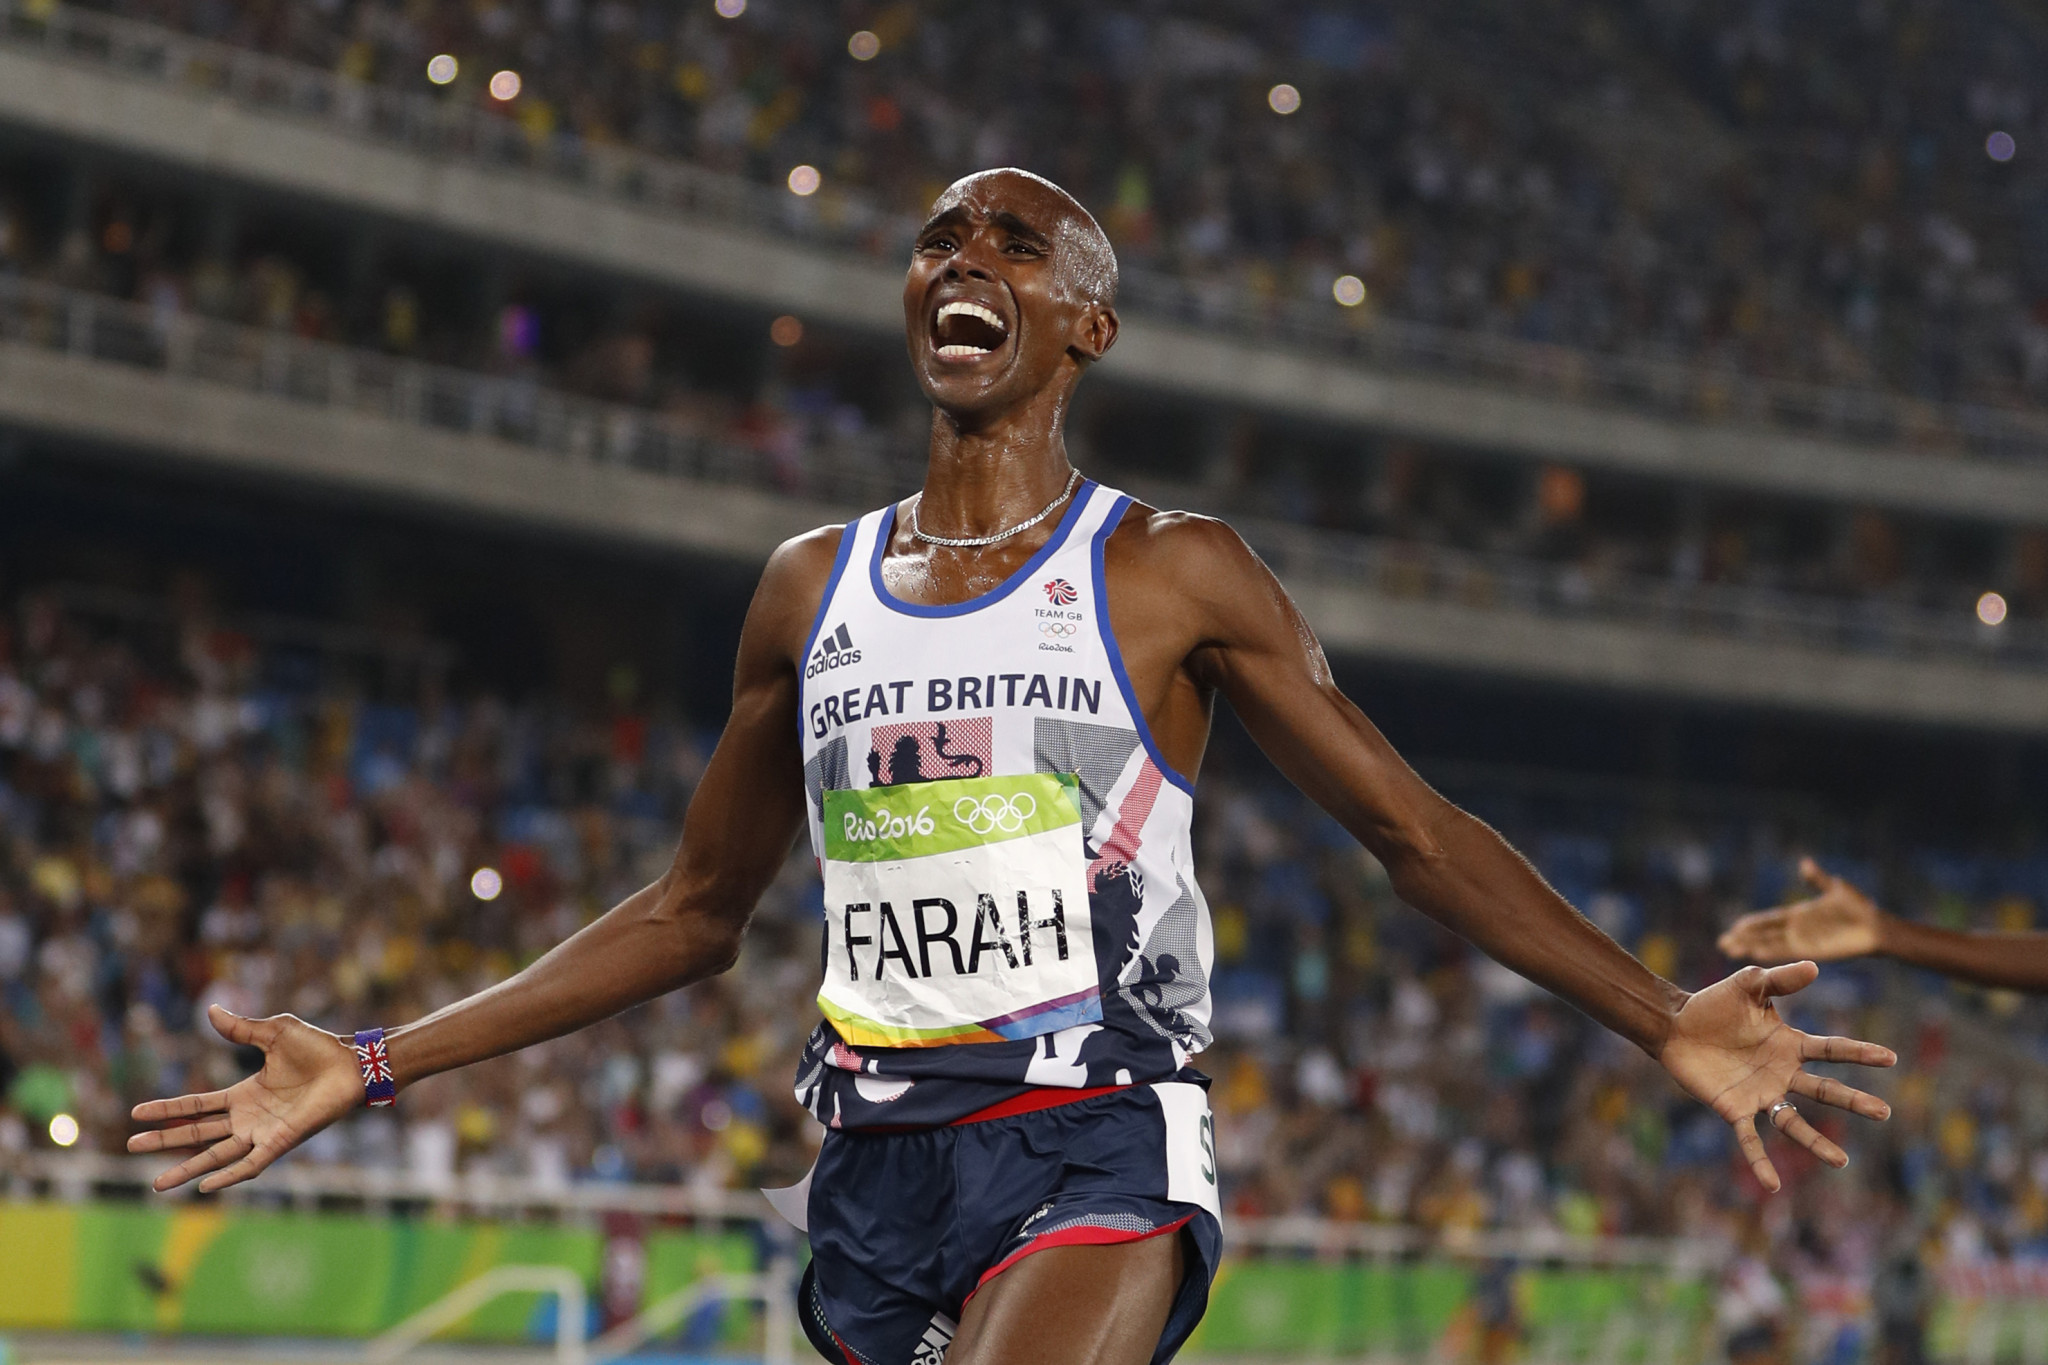 Sir Mo Farah became a four-time Olympic champion with Alberto Salazar as coach ©Getty Images